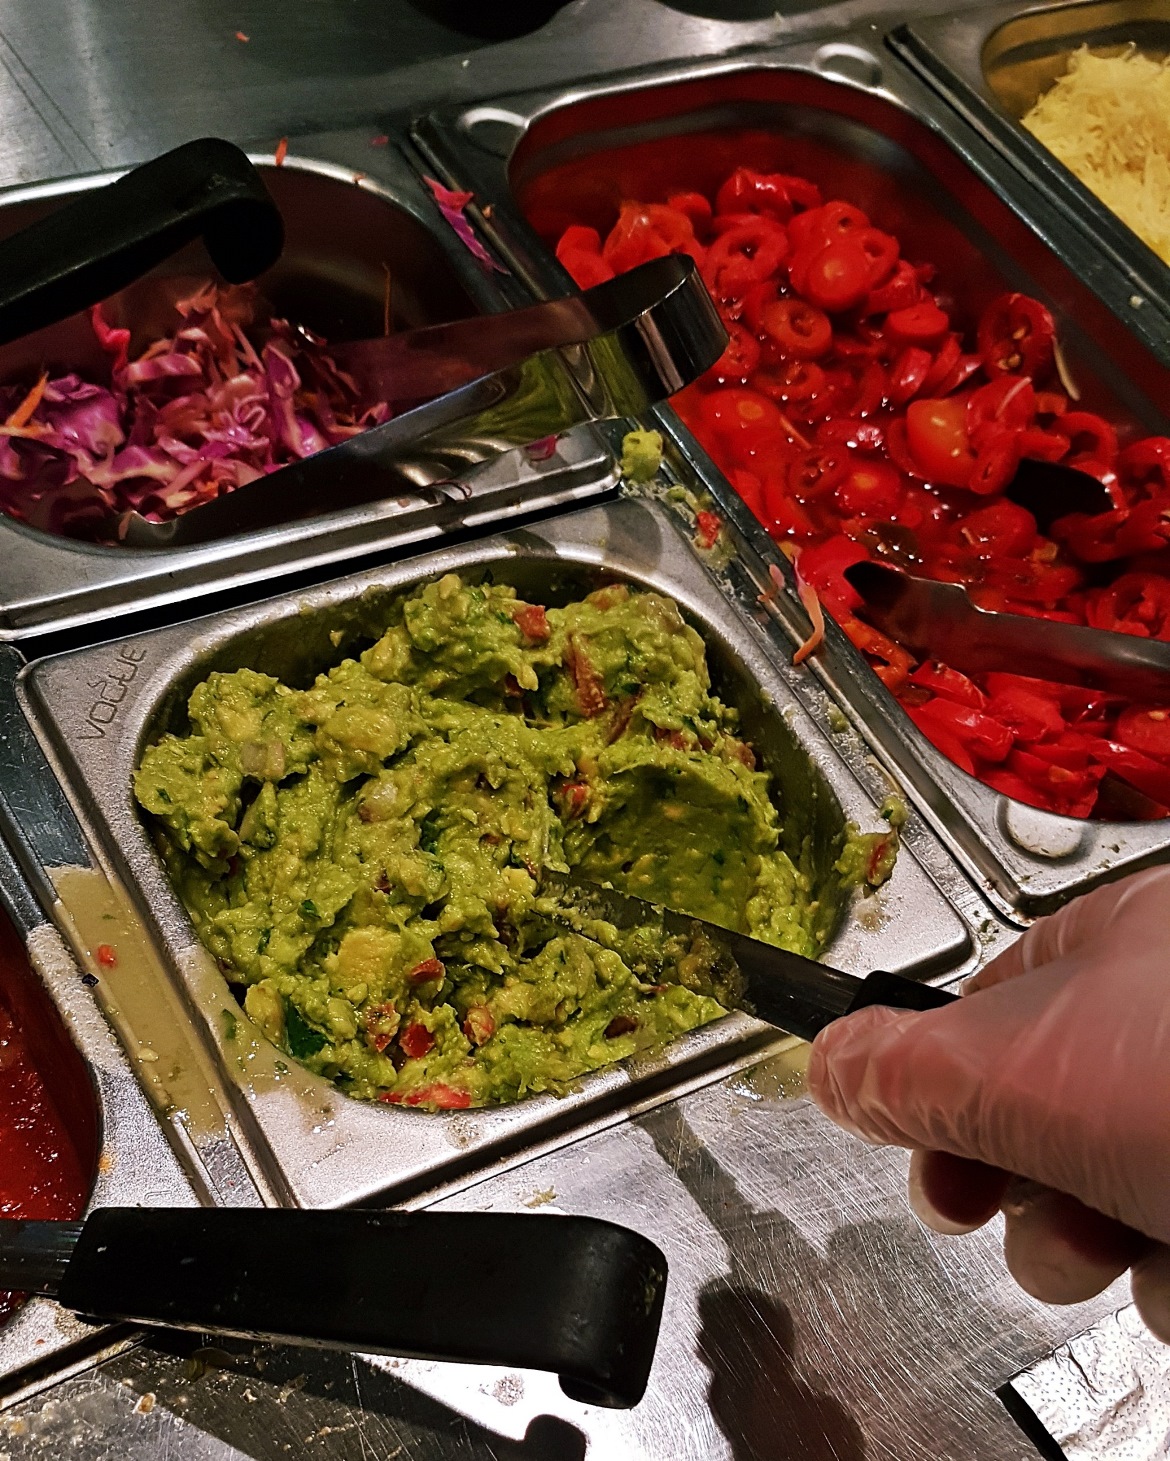 Ladle full of guacamole - Burrito Masterclass with Barburrito, review by BeckyBecky Blogs